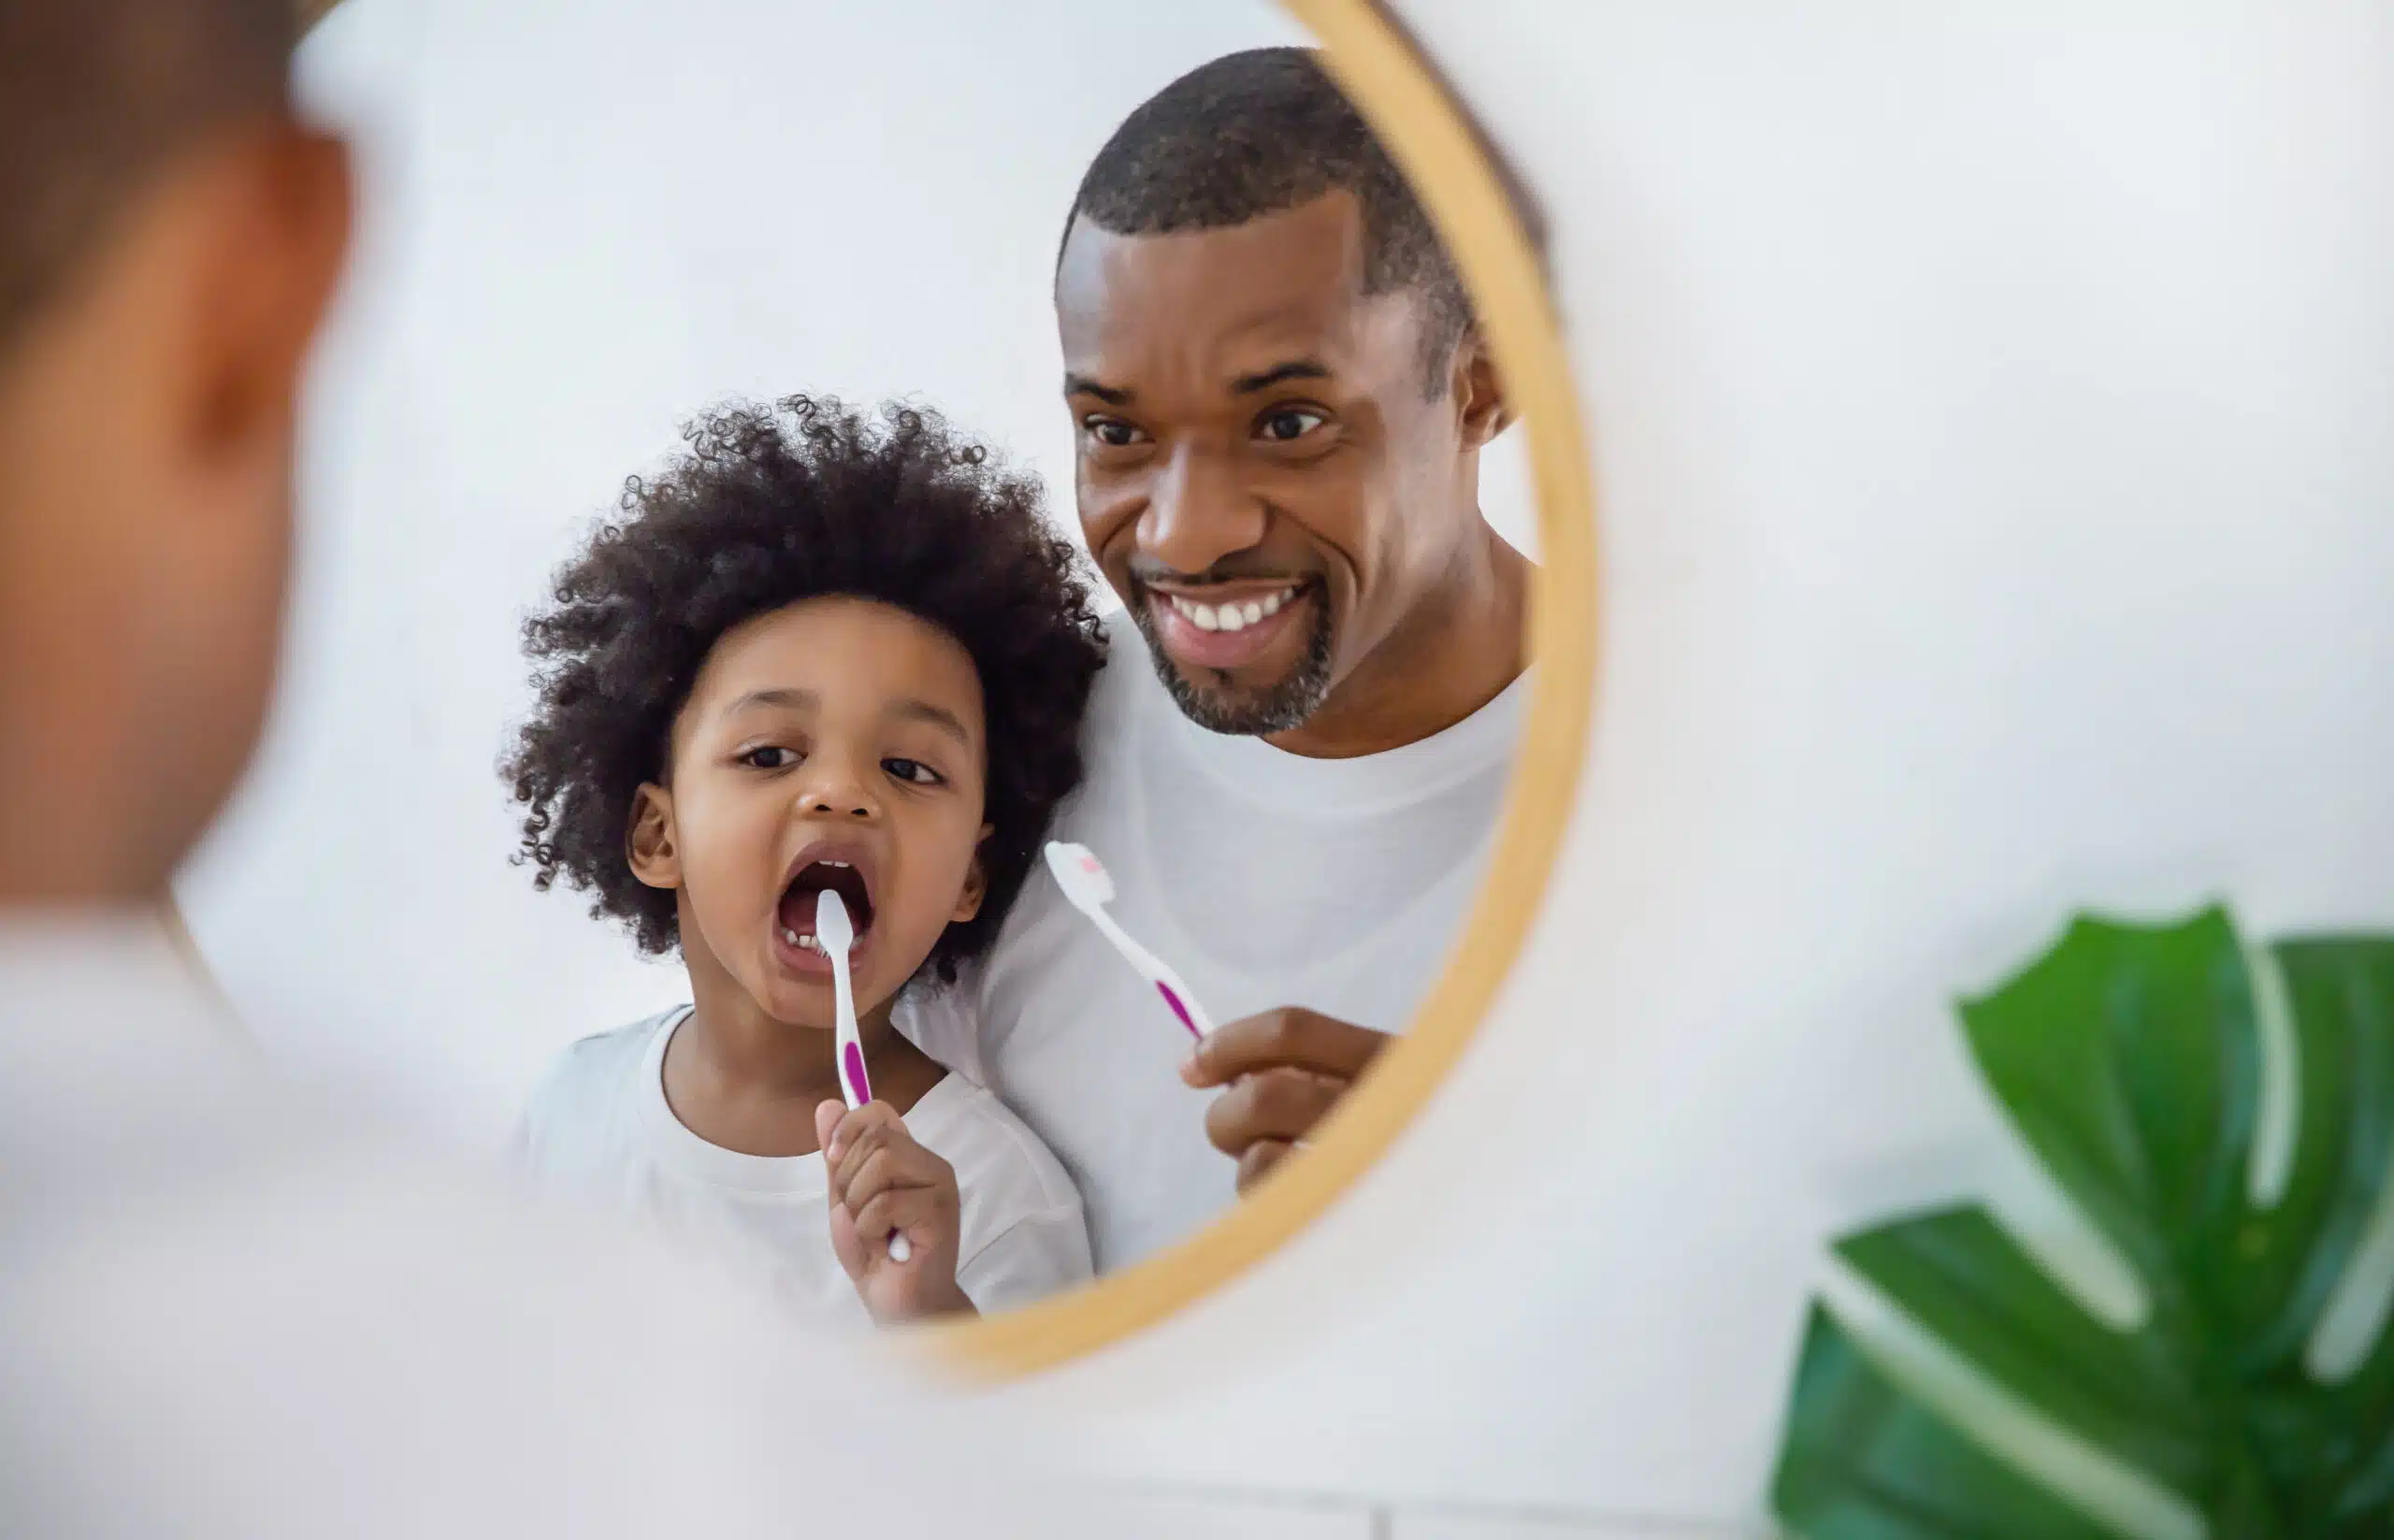 Mirror view of Father and son child brushing teeth.